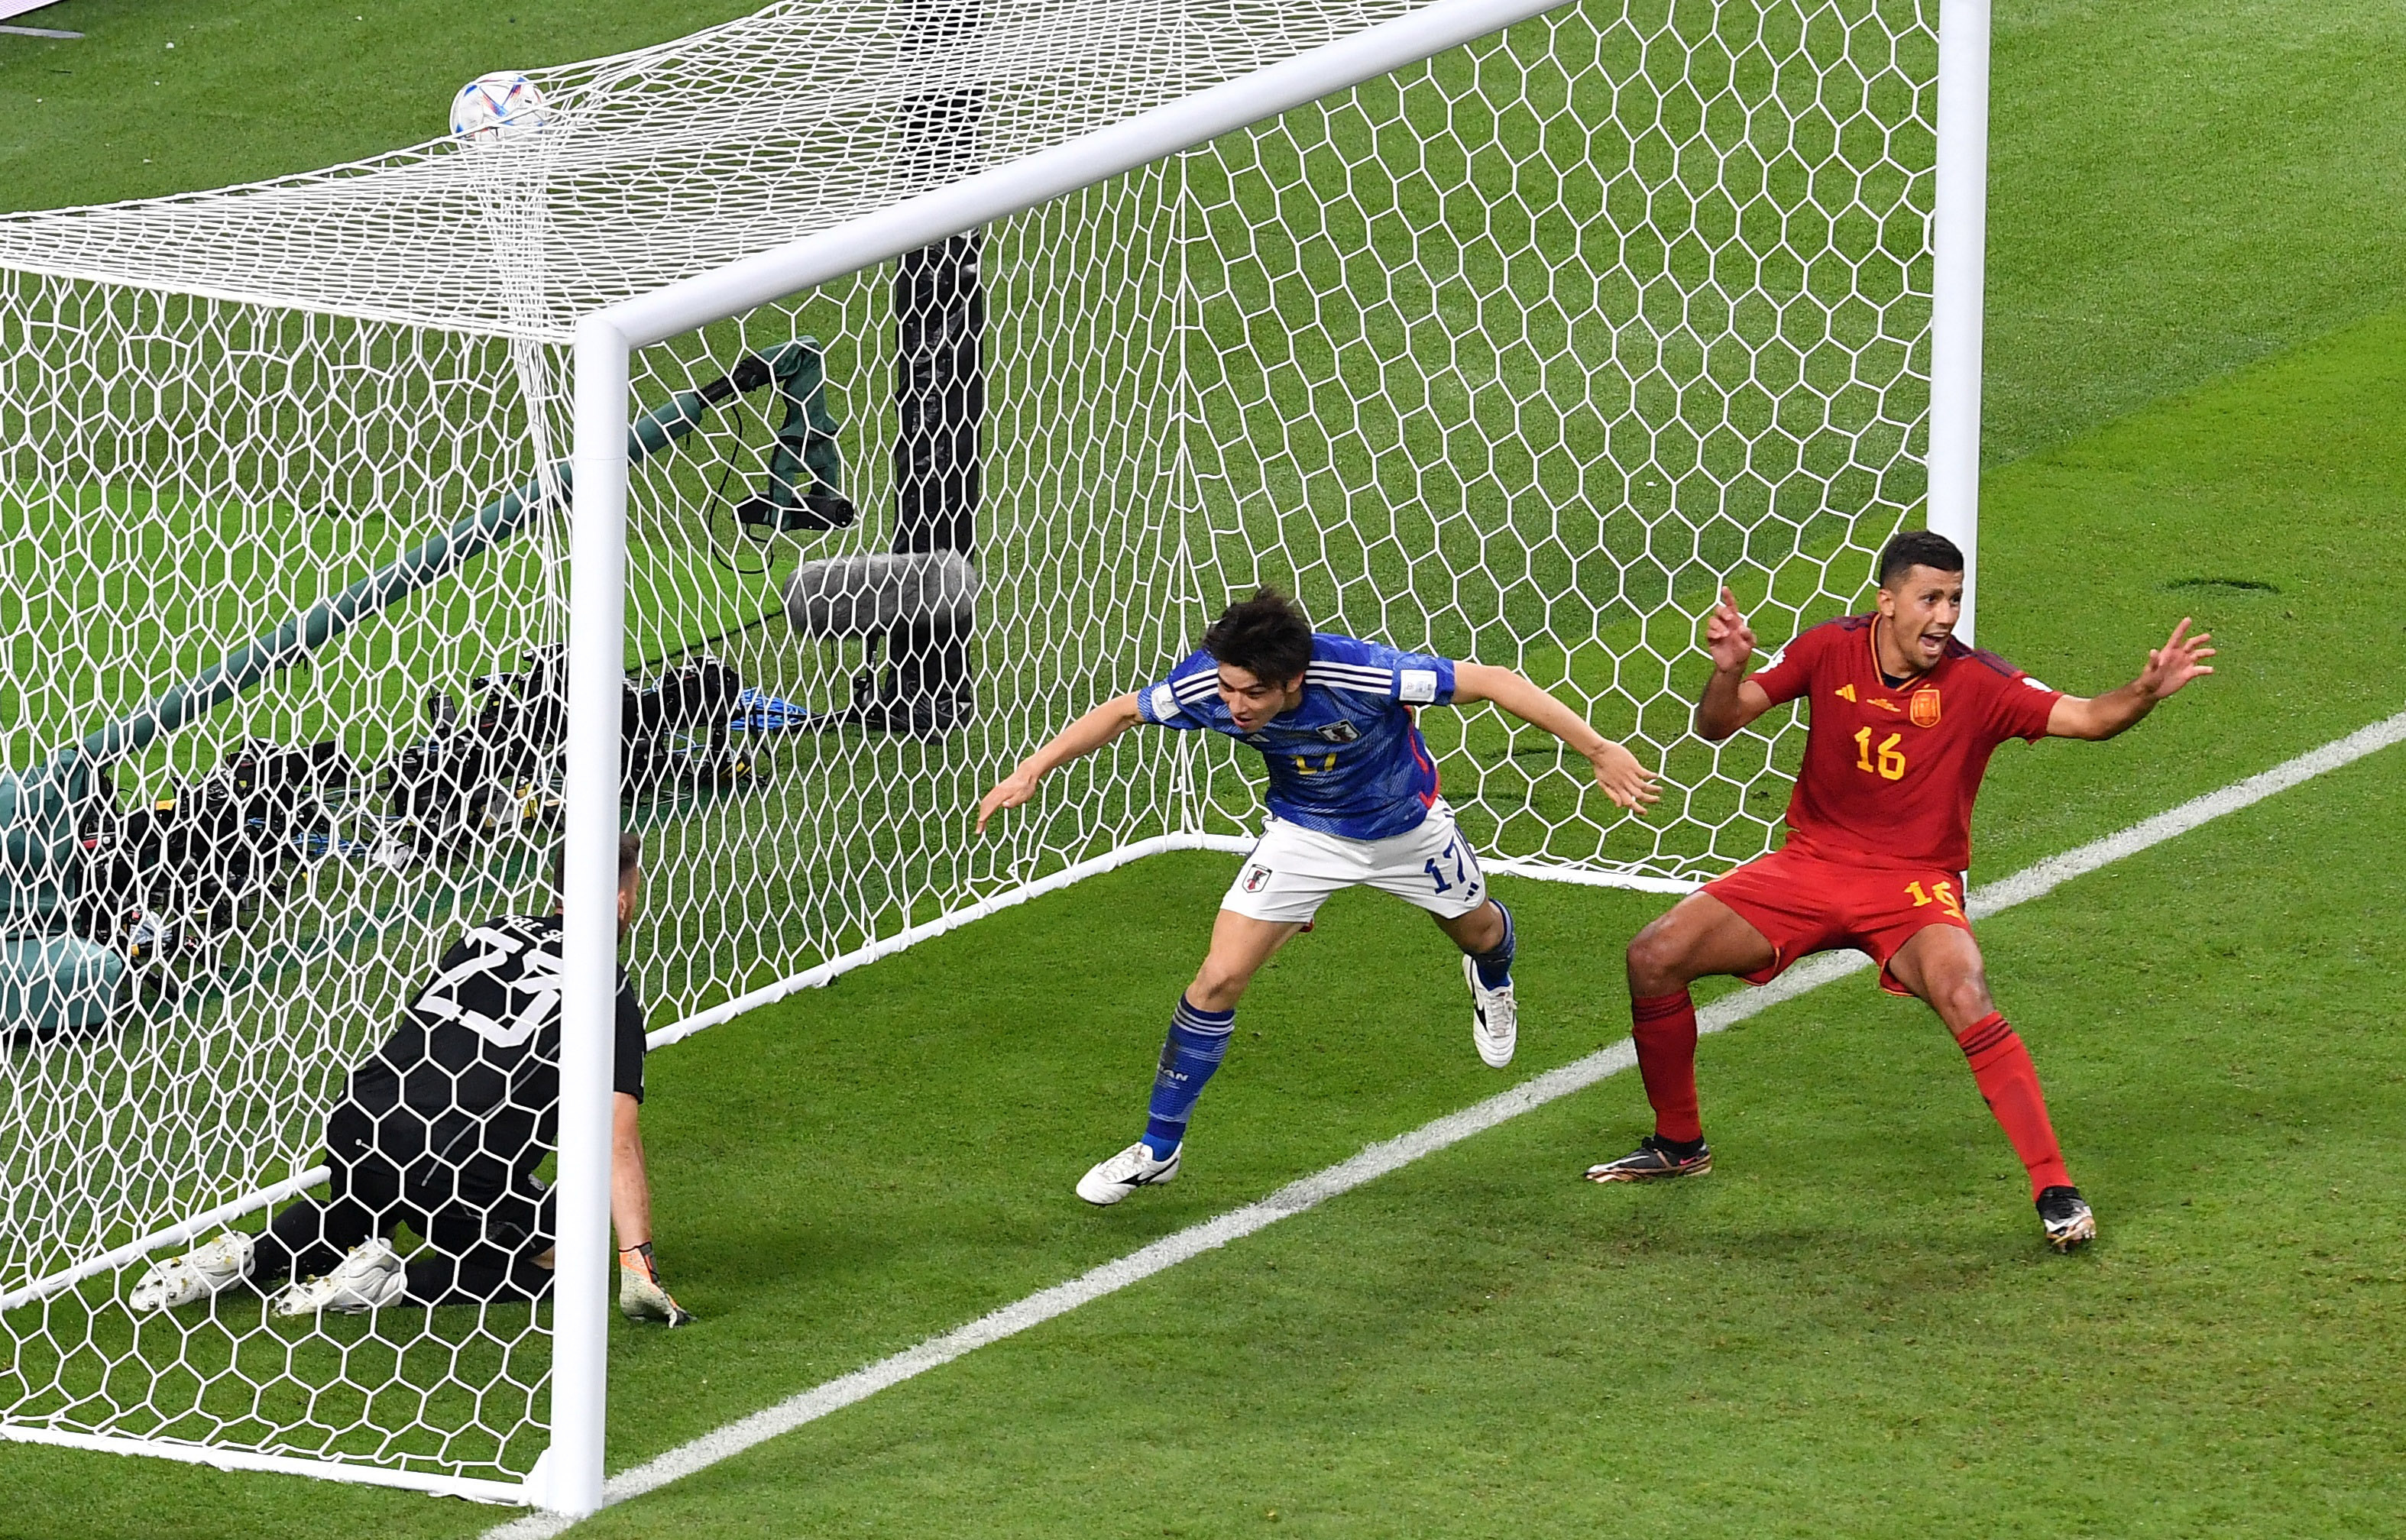 Japan roars back again to shock Spain and top group